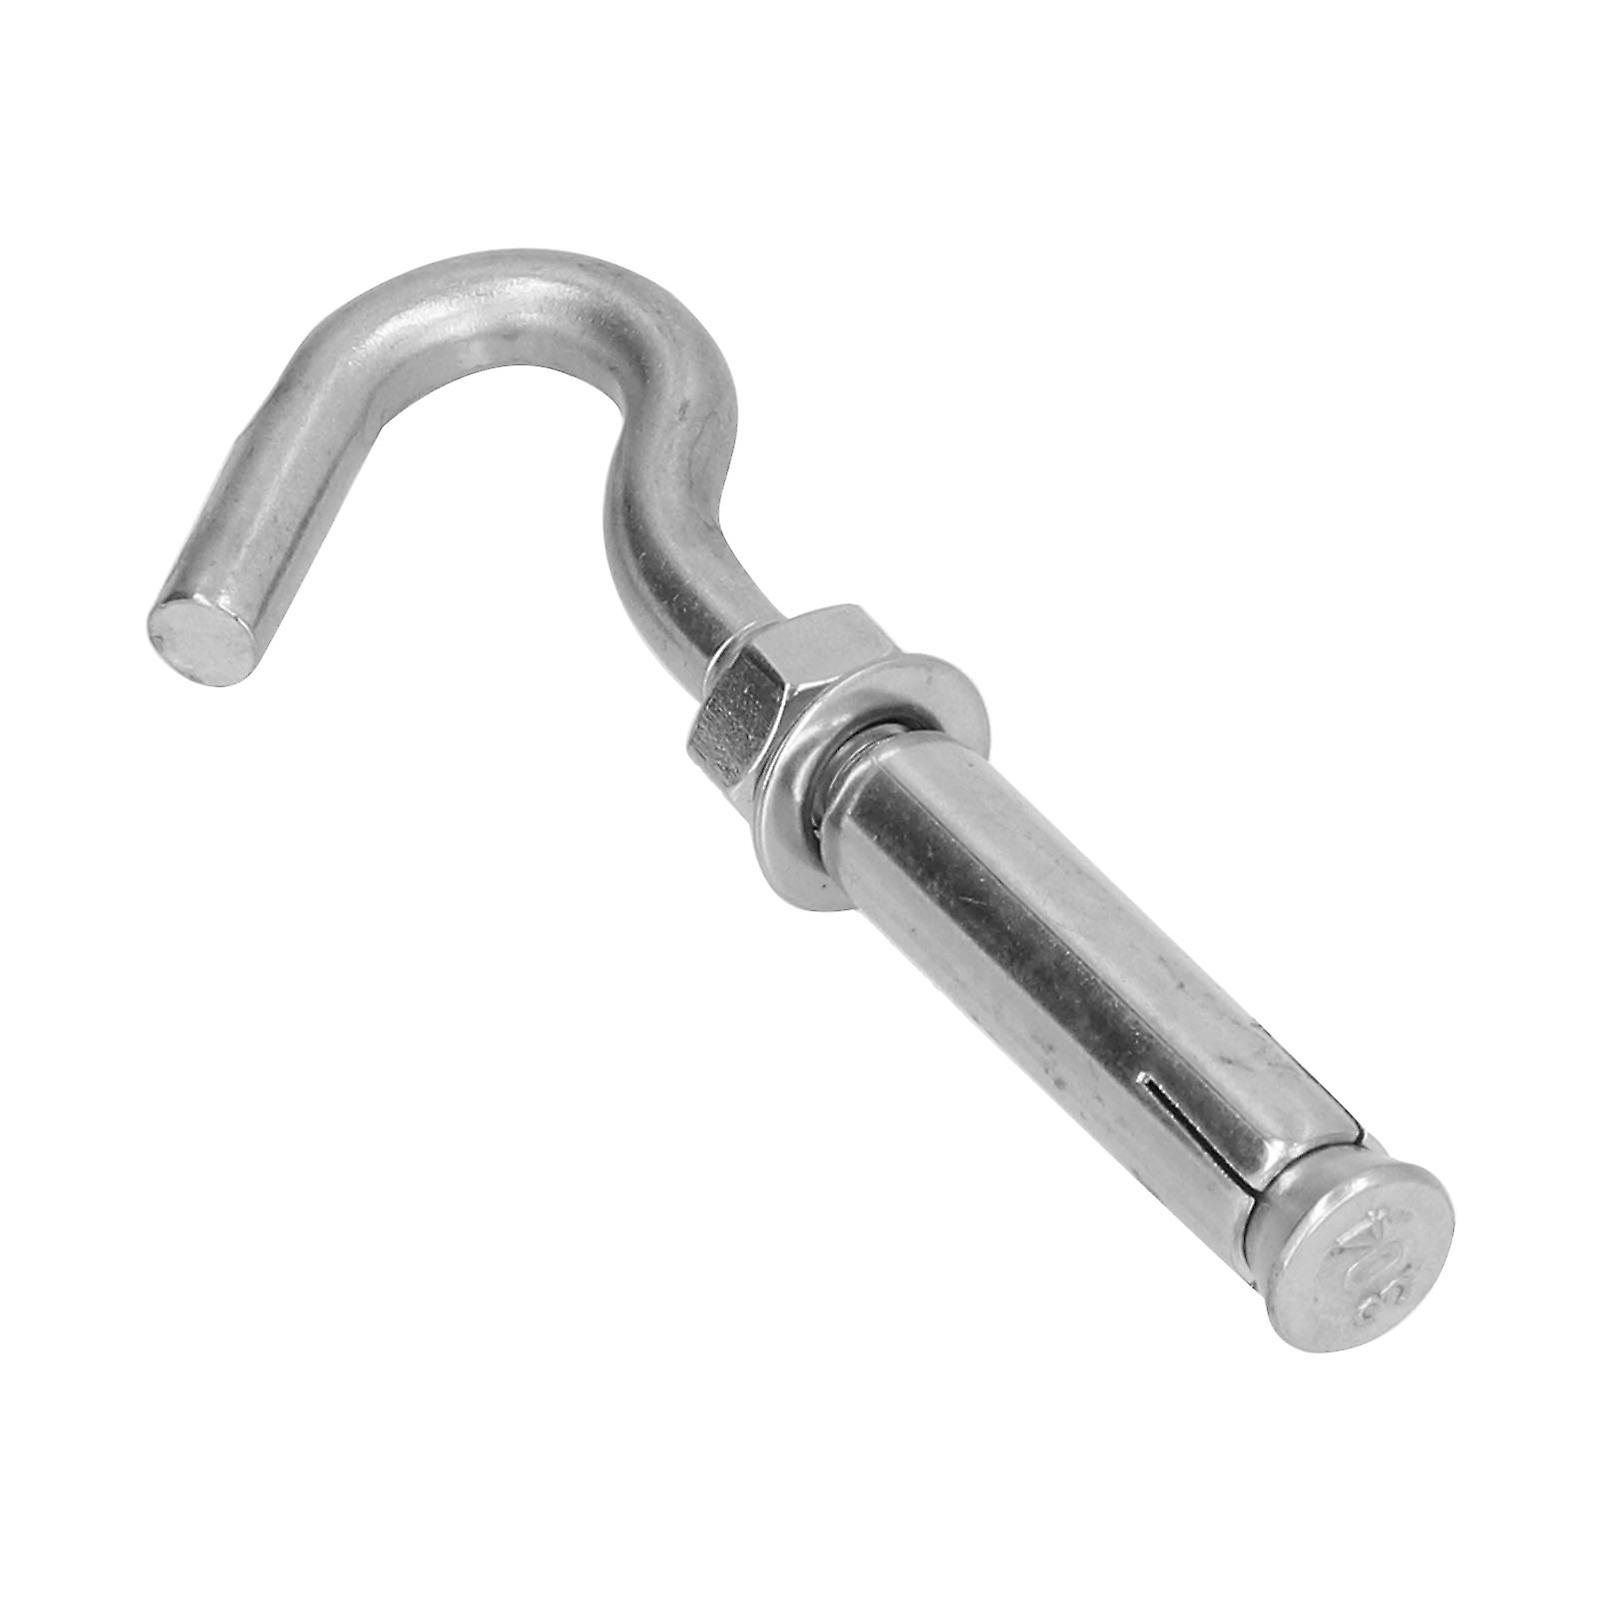 10 Pack M6-m12 Open Cup Expansion Bolts Hook Stainless Steel Hook Bolts Industrial Supplies[m10]